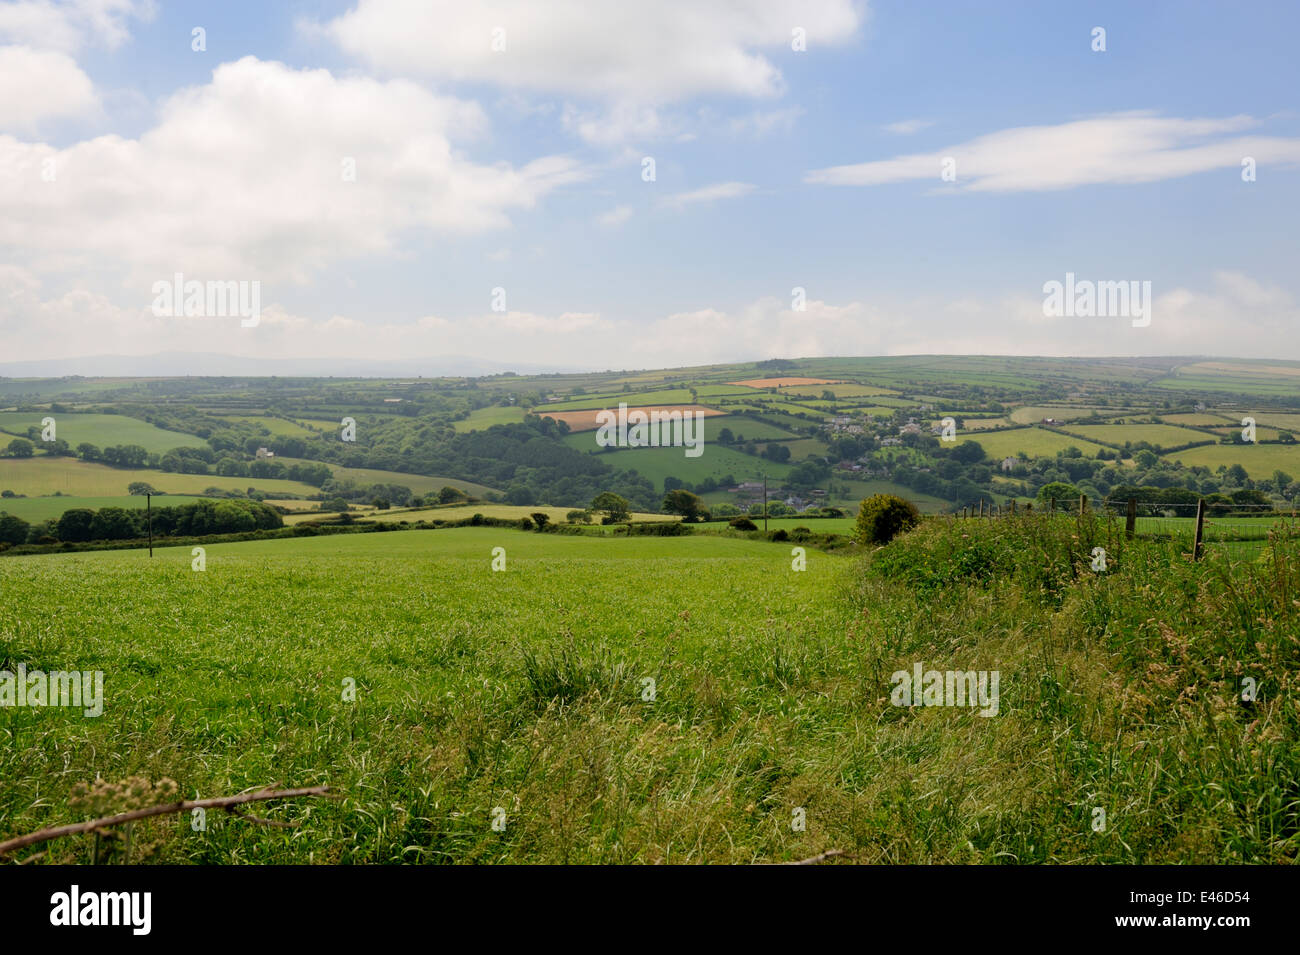 Wales countryside with grass ready for harvesting and patchwork fields in distance, Pembrokeshire, UK Stock Photo